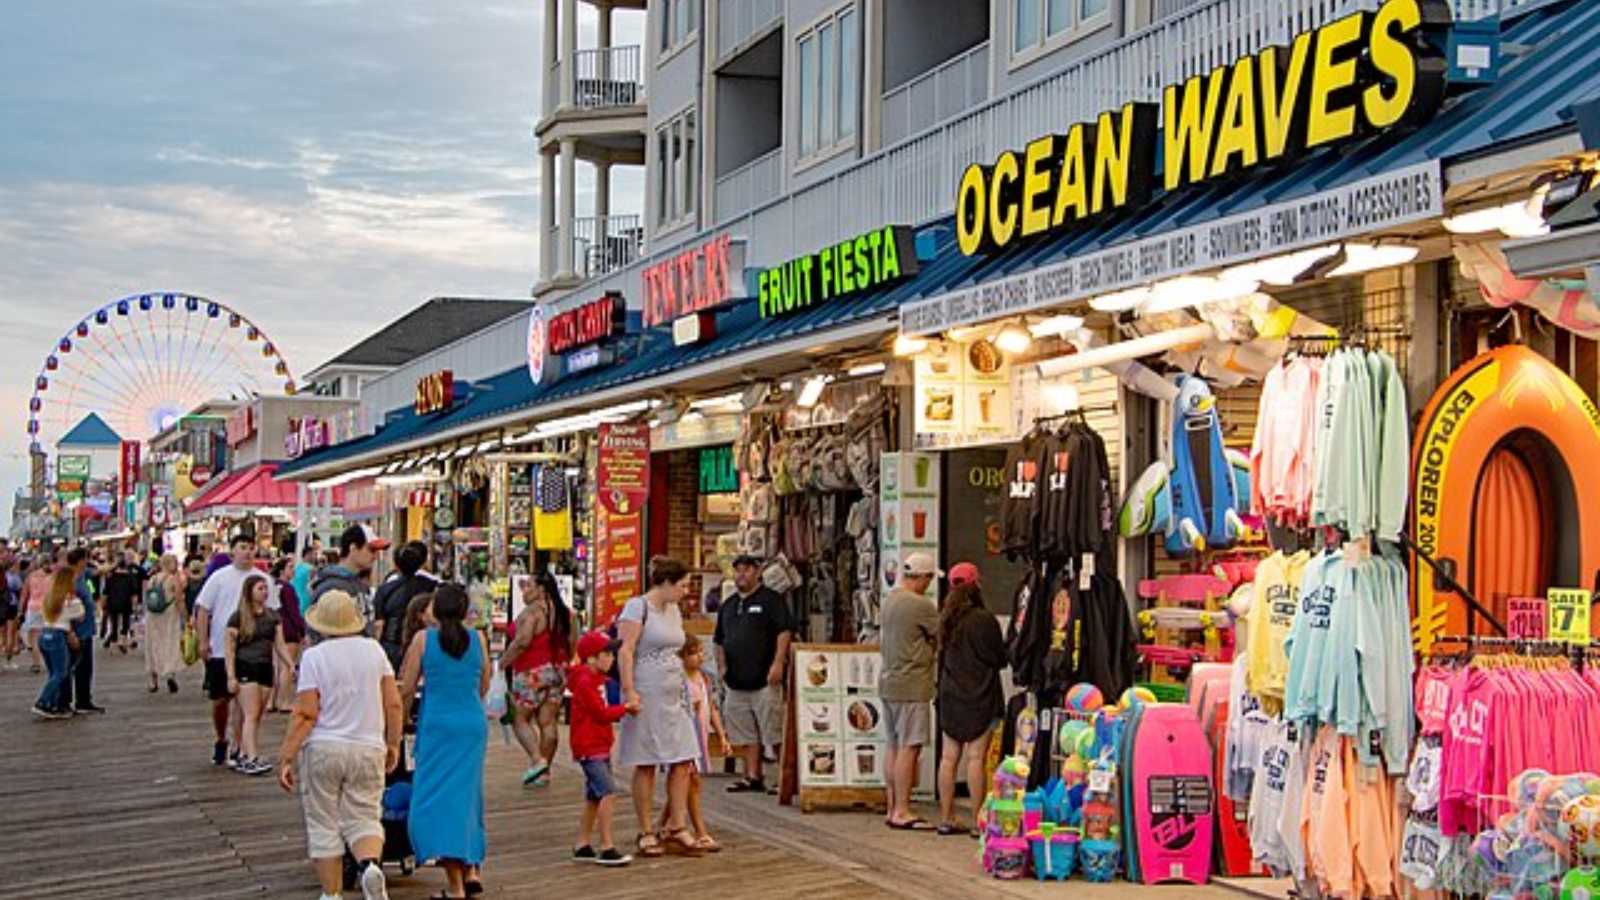 <p><span>Overcrowded and filled with low-quality souvenirs, the Ocean City Boardwalk offers little beyond the typical beach town fare. It's a tourist trap in the truest sense.</span></p>